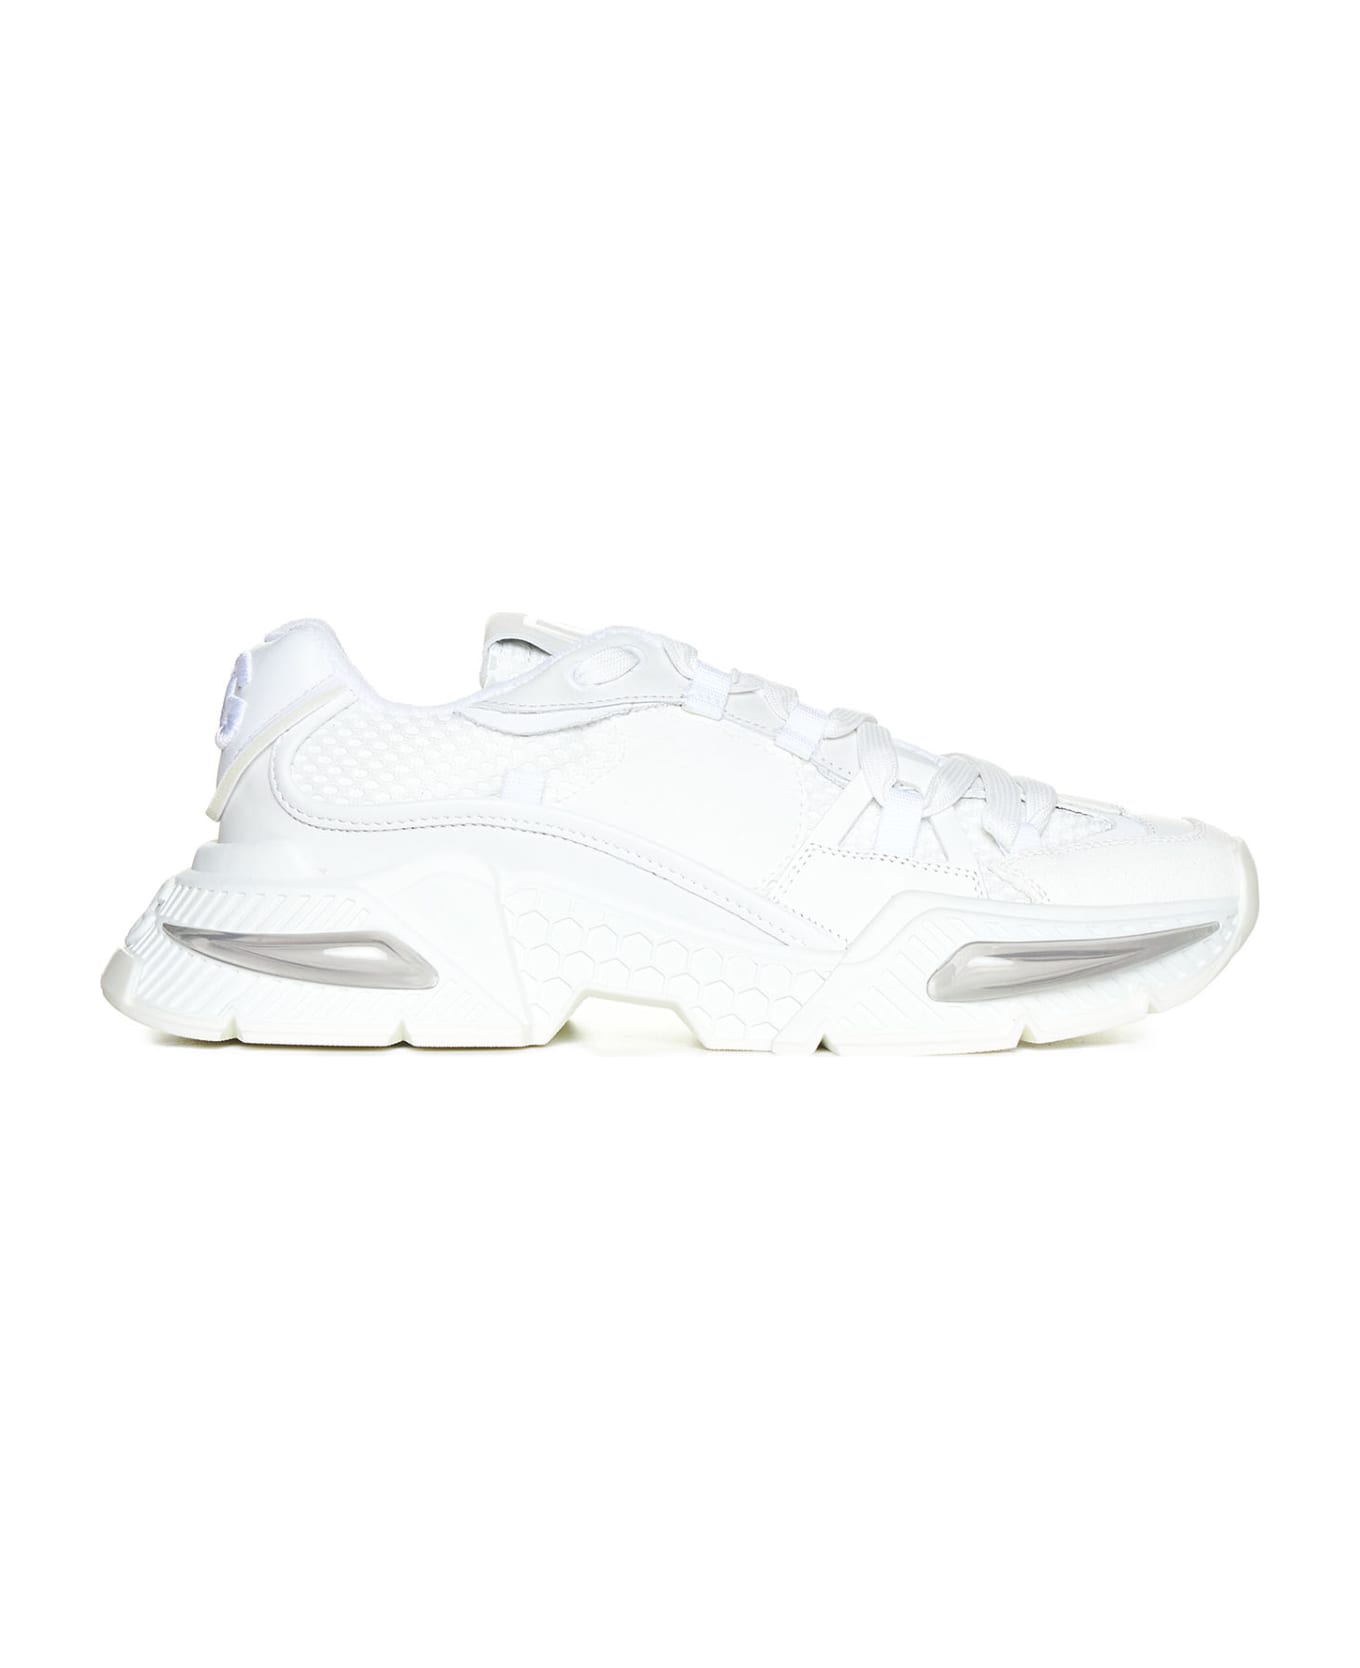 Dolce & Gabbana Airmaster Sneakers - White